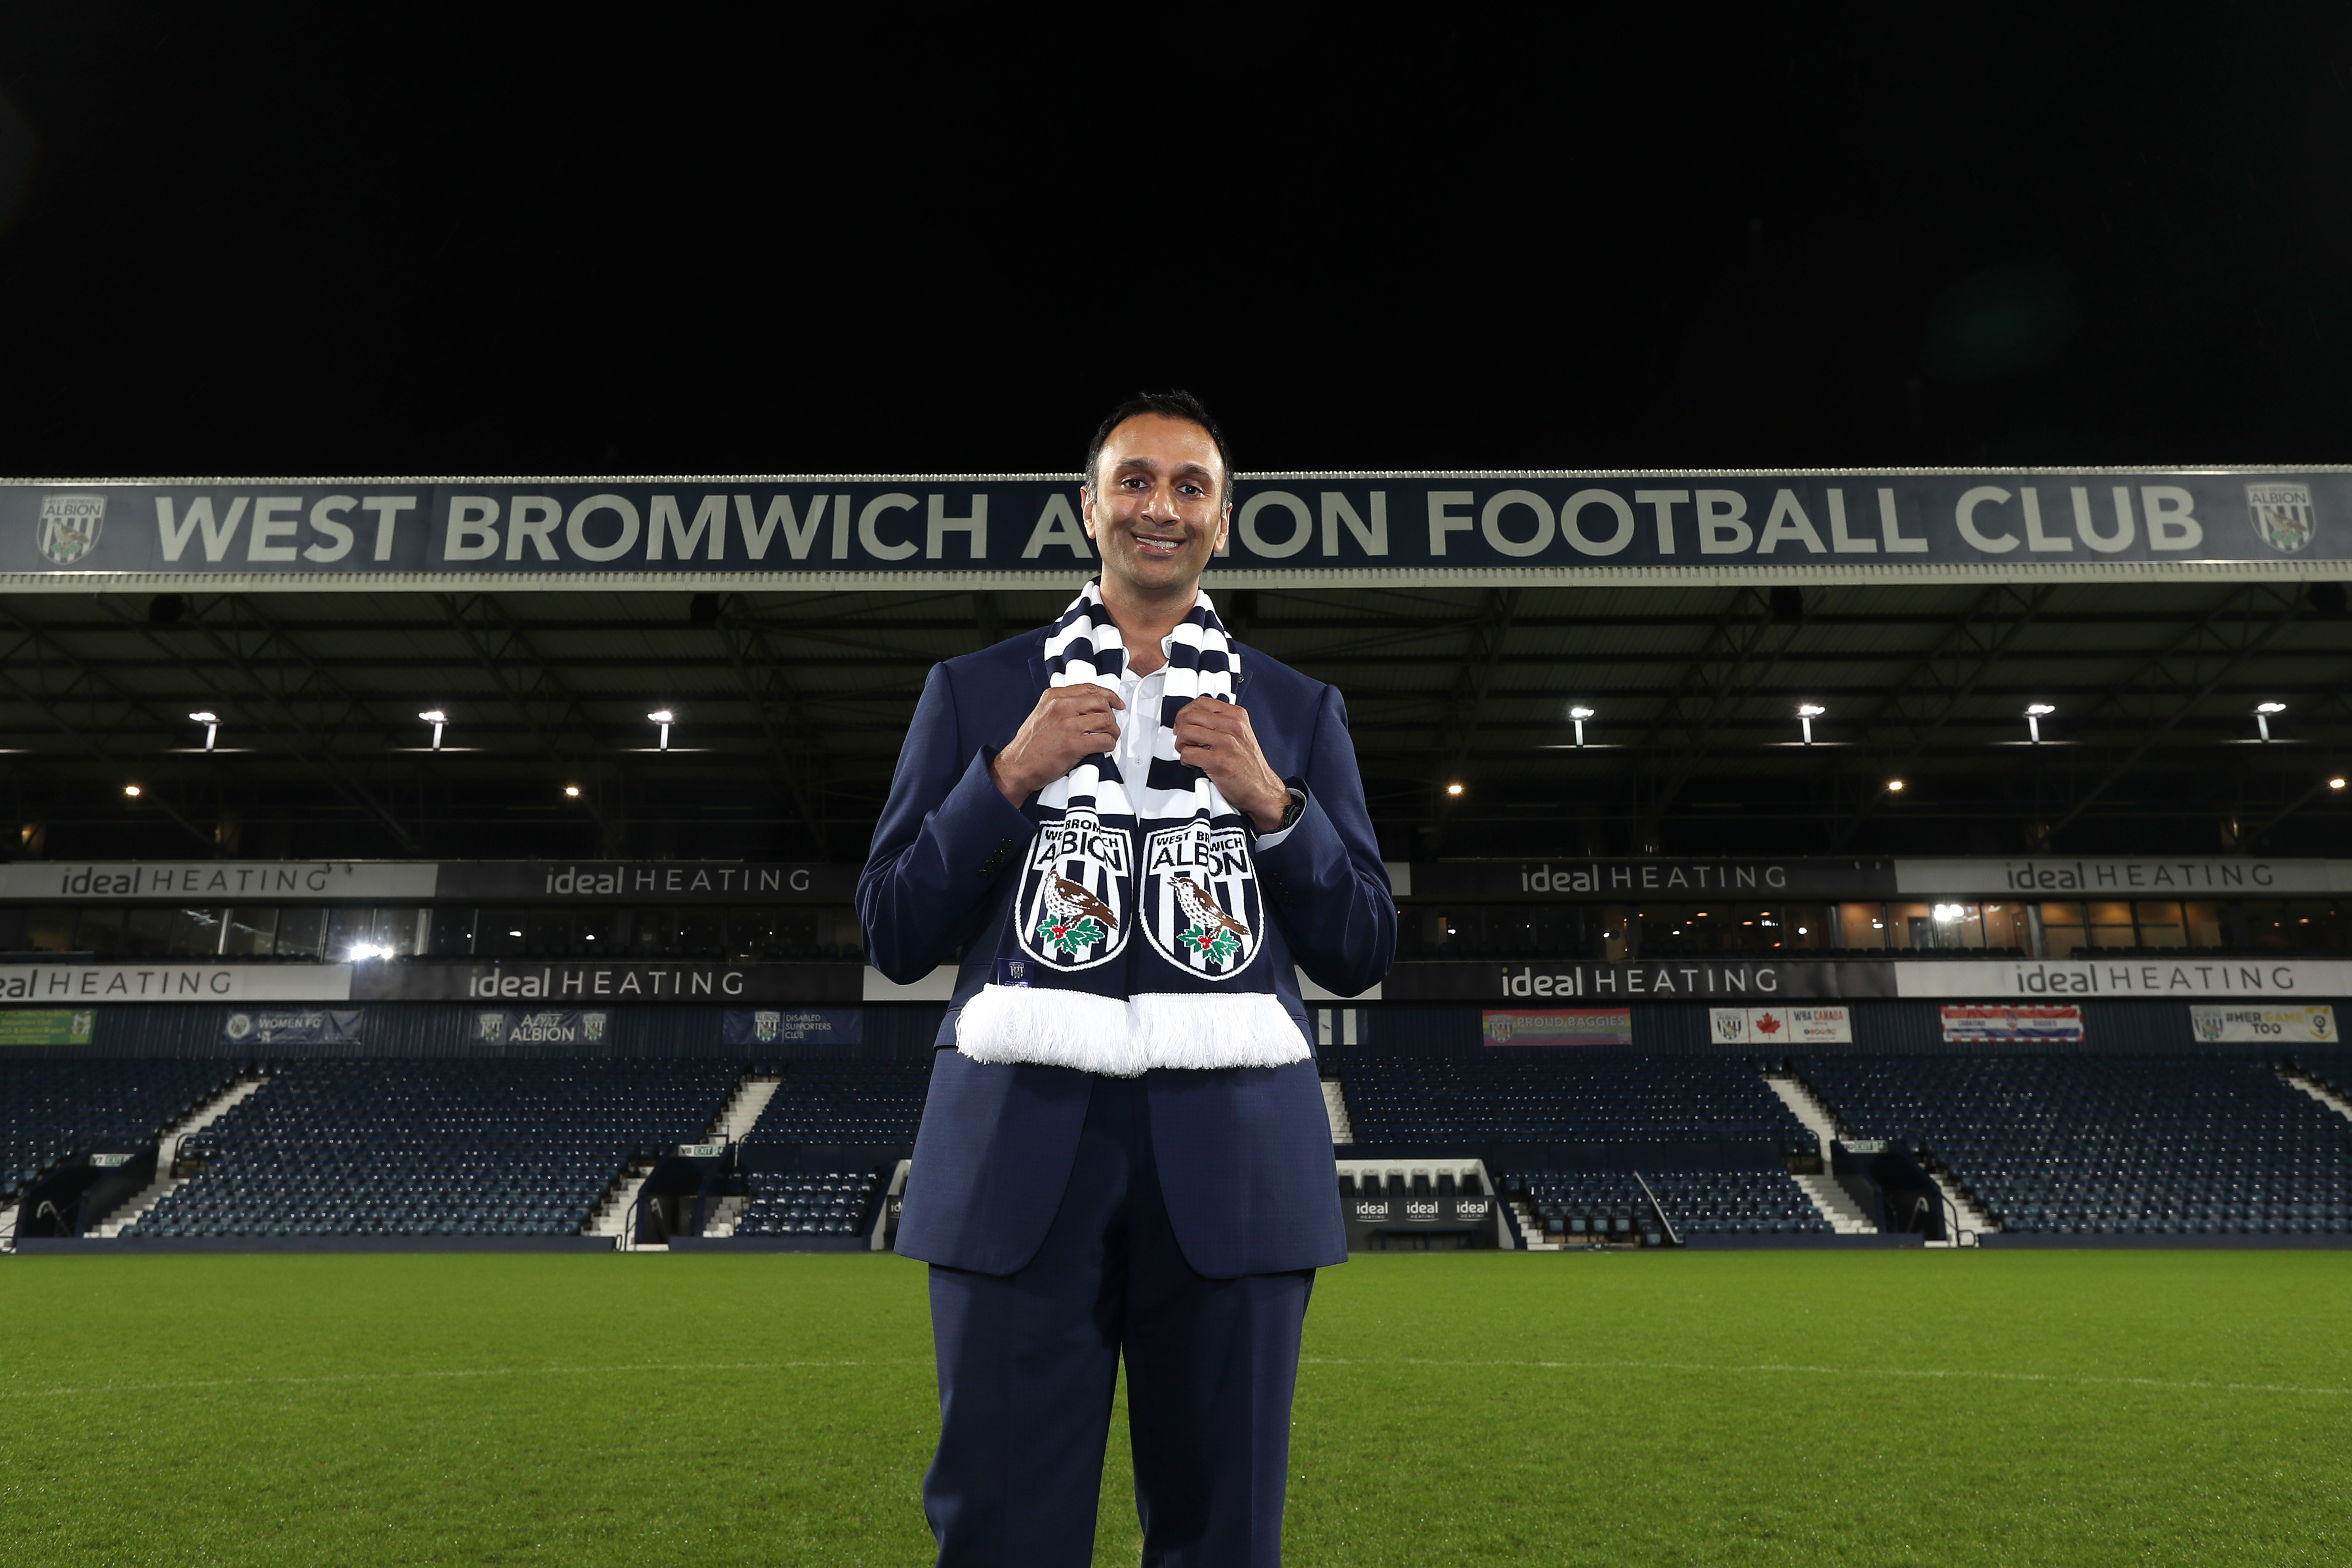 Shilen Patel stood on the pitch at The Hawthorns with the West Stand behind him and an Albion scarf wrapped around his neck